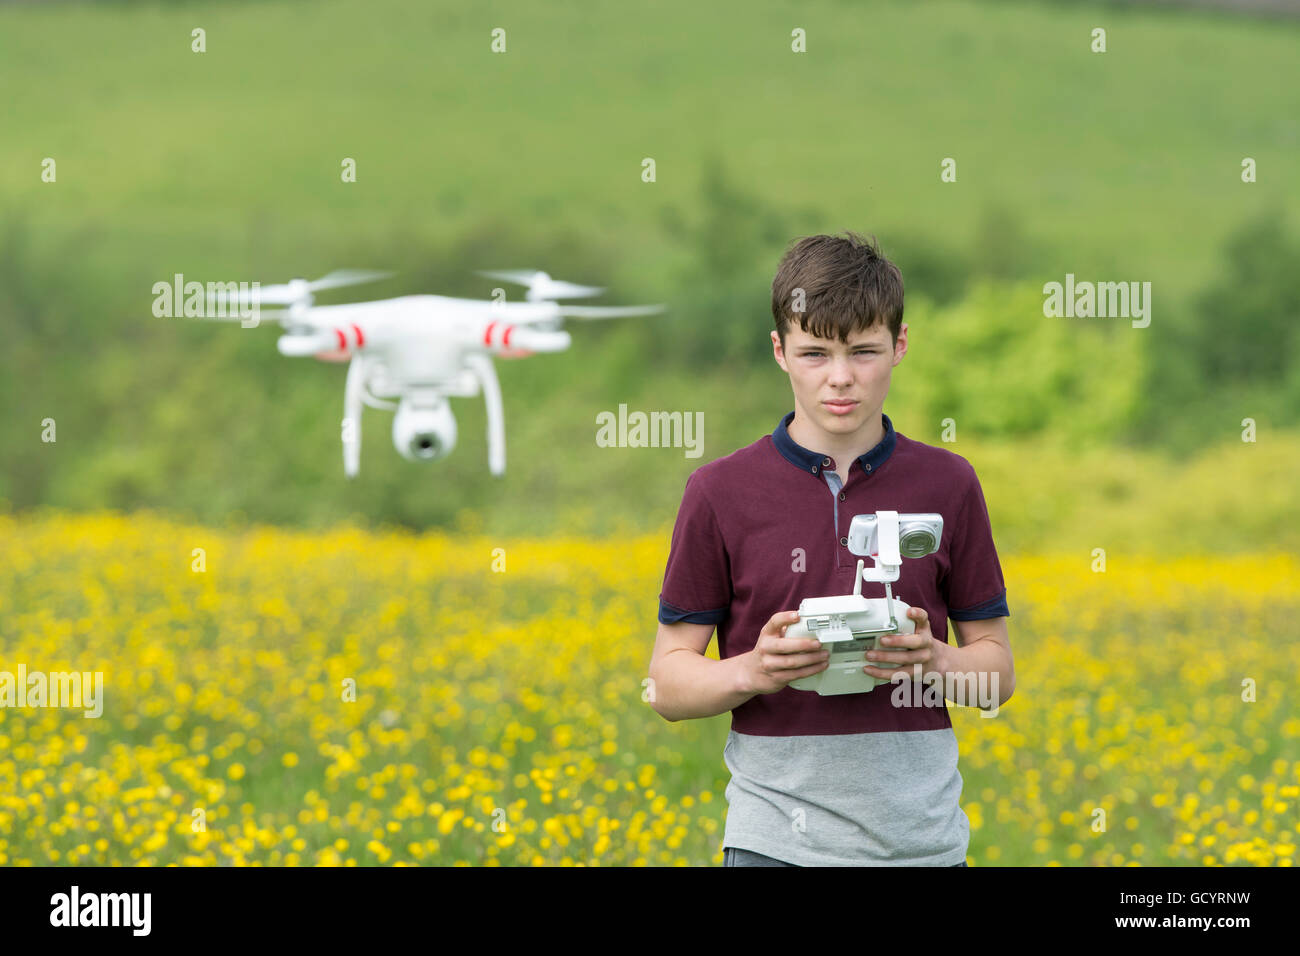 Teenage boy operating a quadcopter drone in countryside, UK. Stock Photo